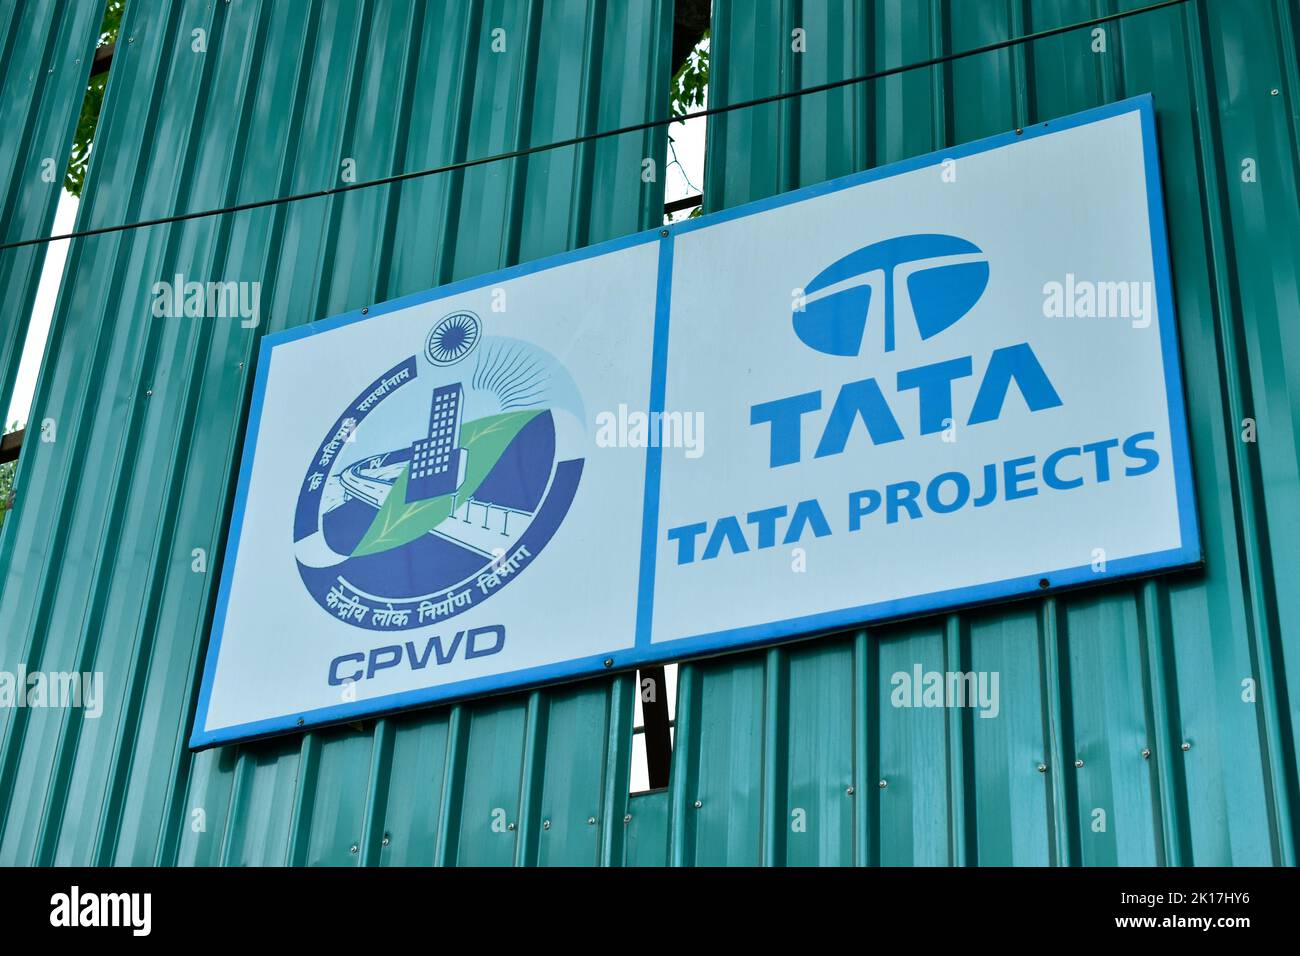 New Delhi, India - 14 September 2022 : Cpwd and tata projects board on construction site Stock Photo